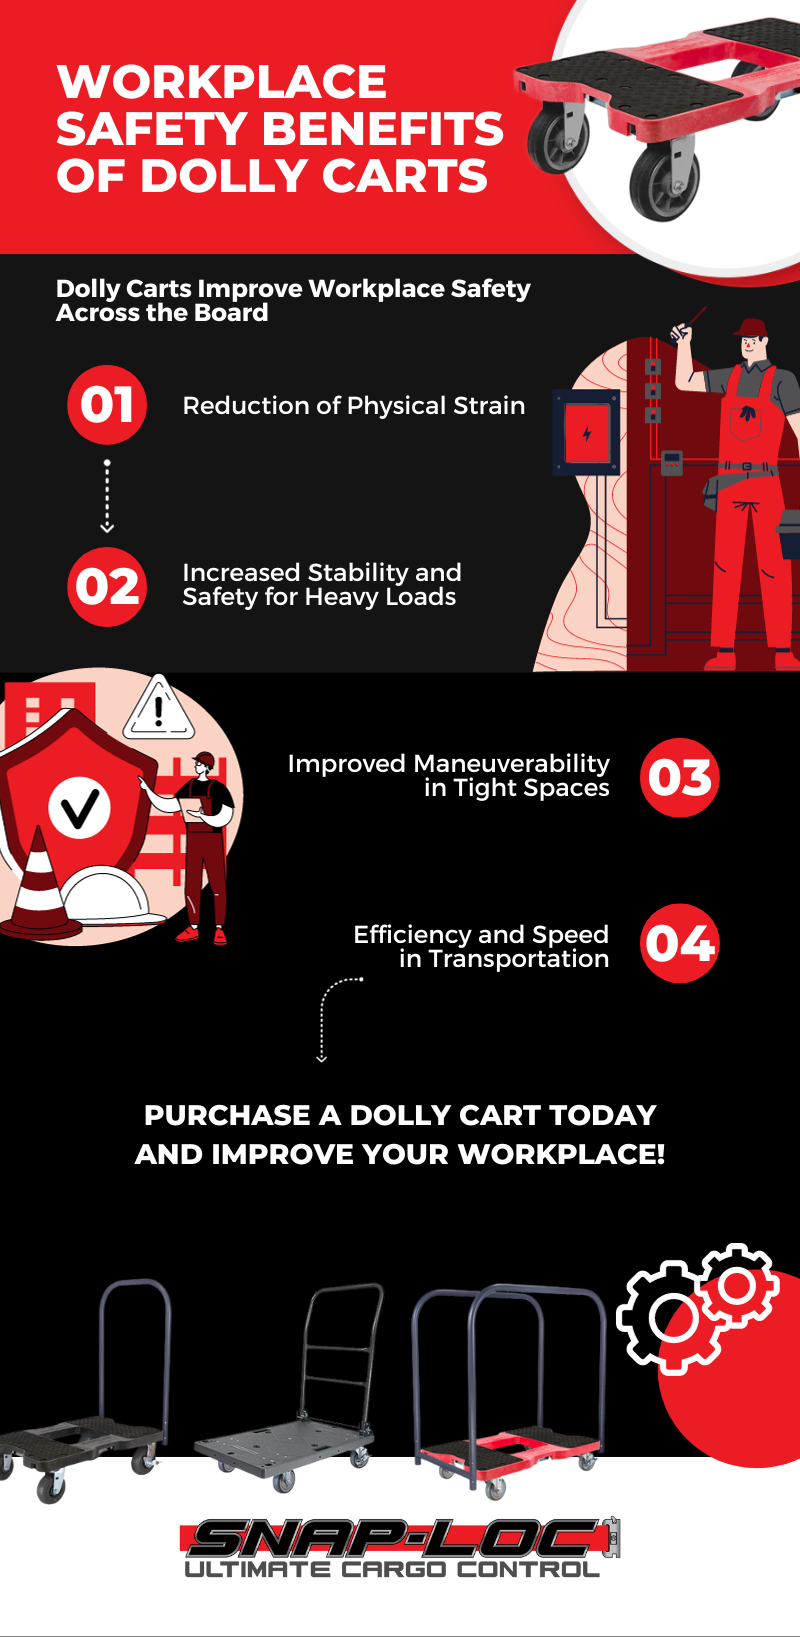 Workplace Safety Benefits of Dolly Carts